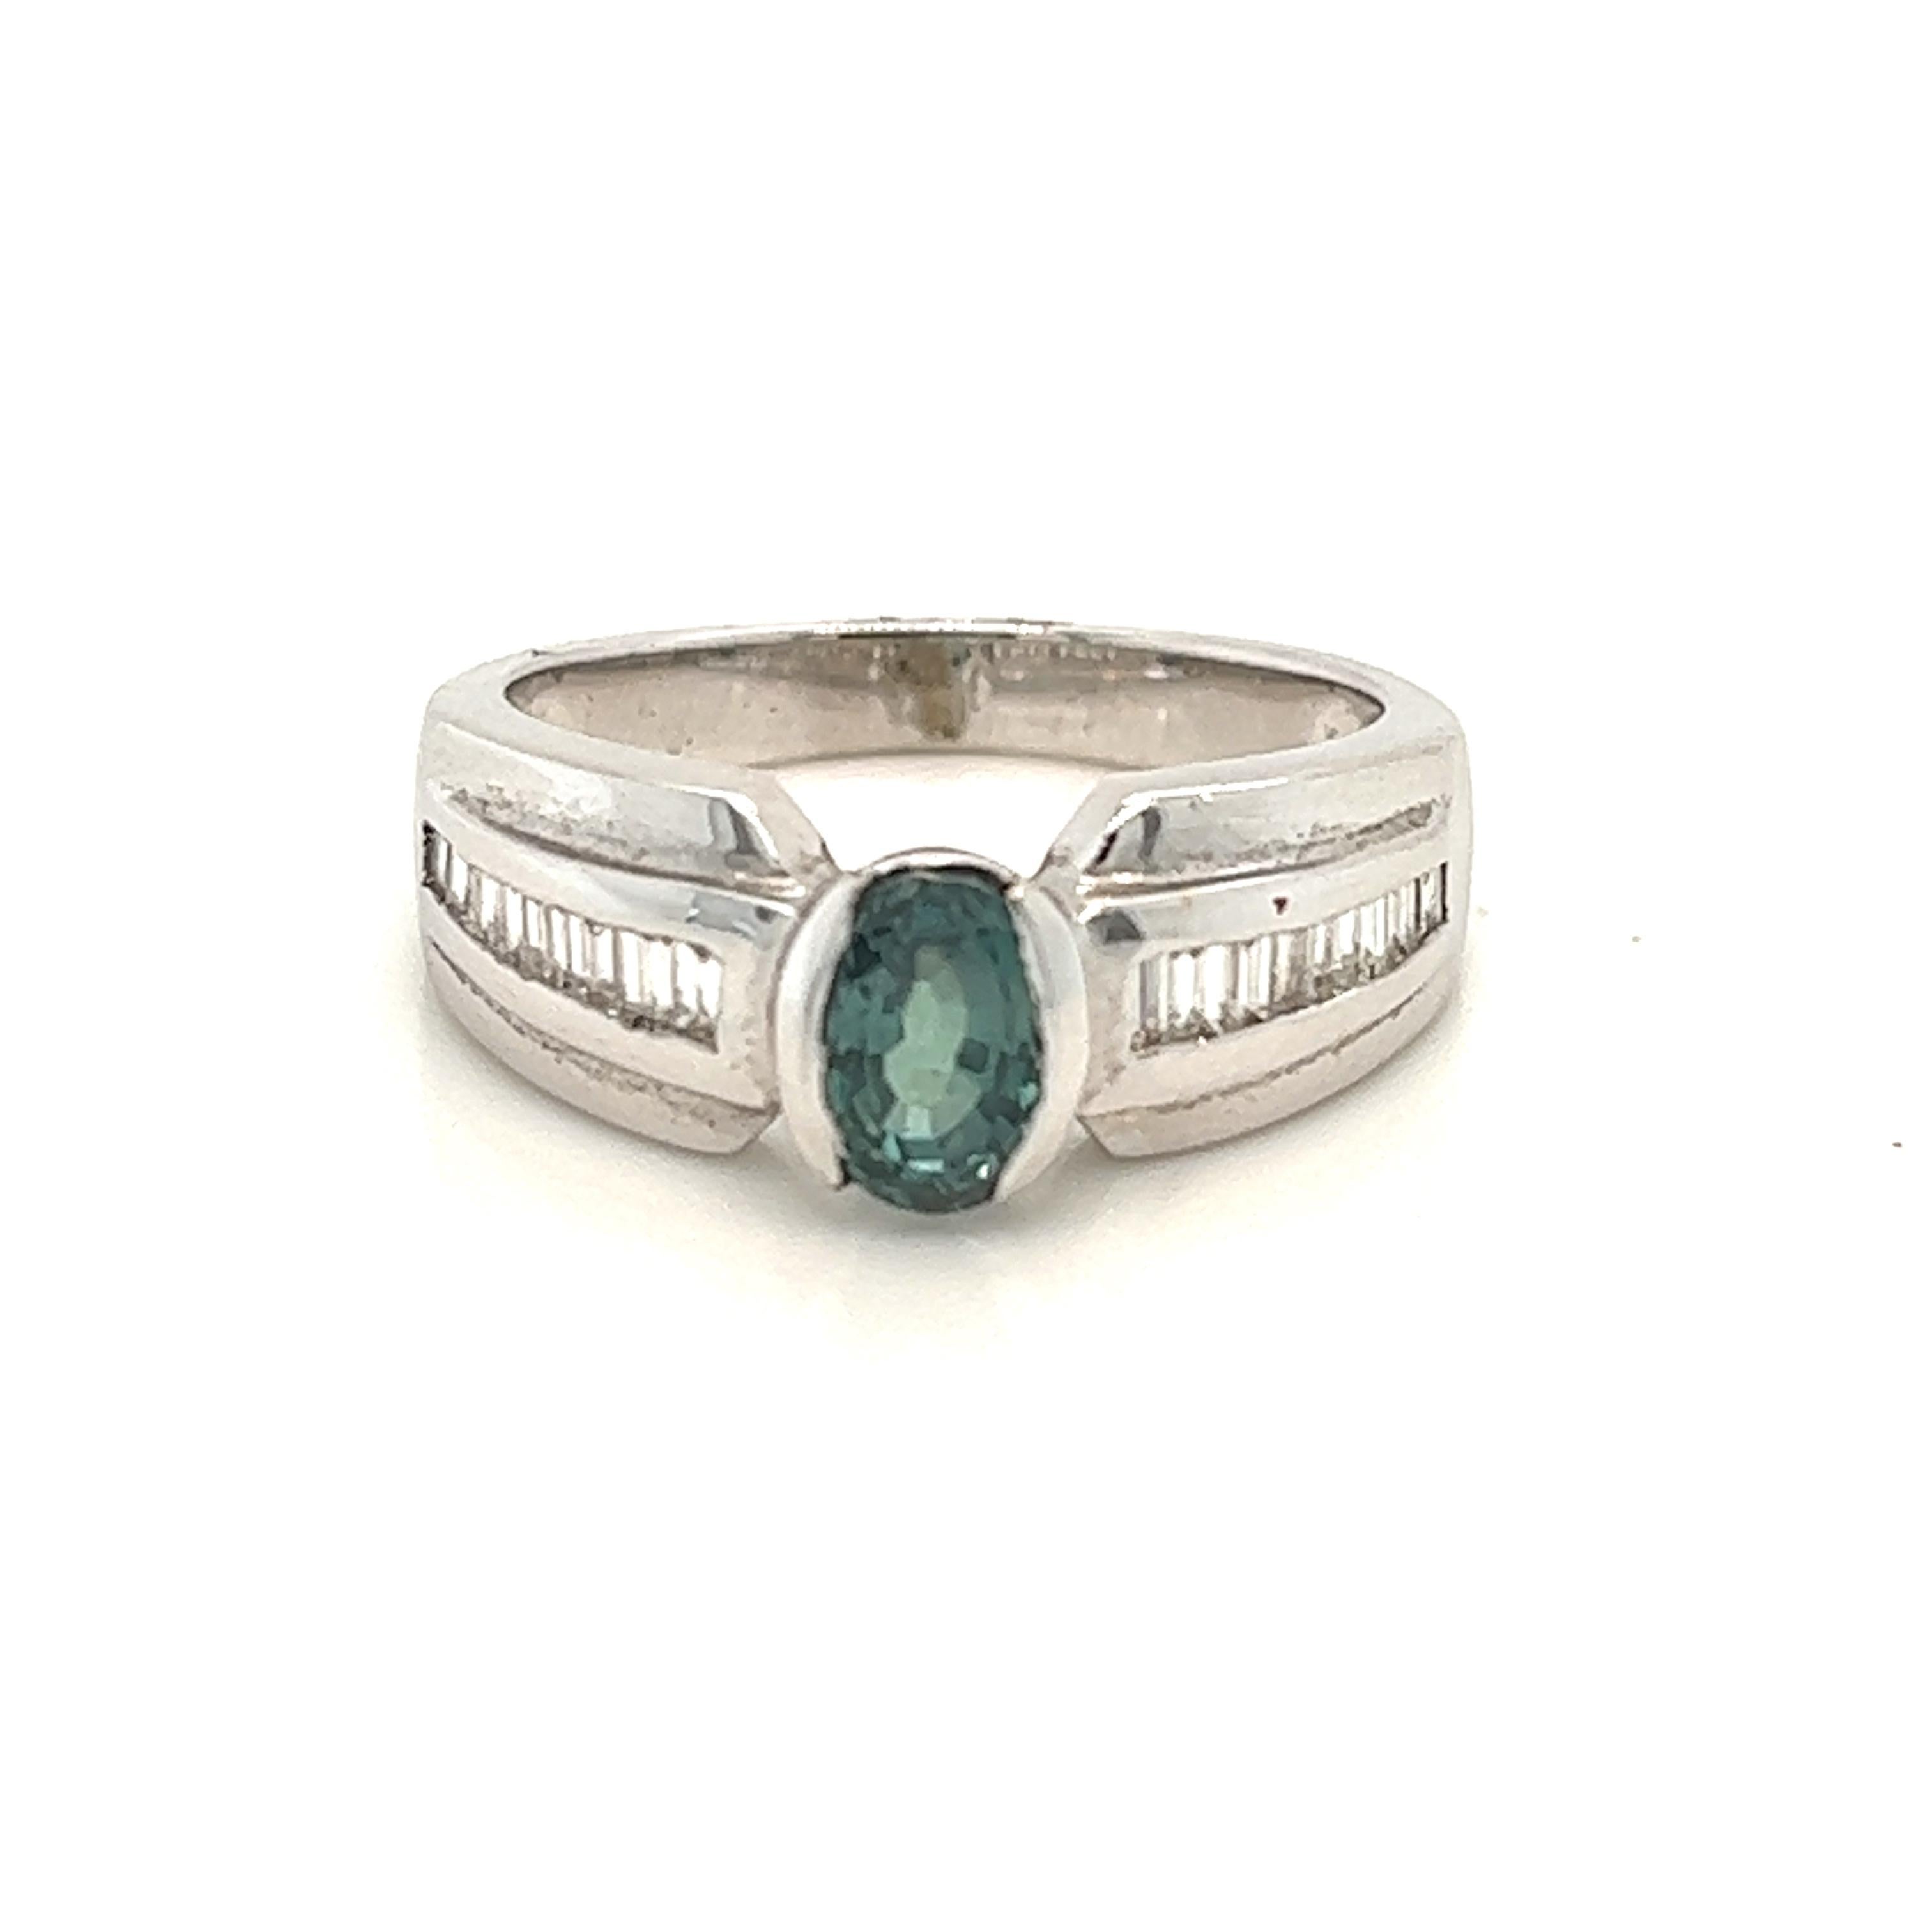 This is a gorgeous natural AAA quality Oval Alexandrite with Baguette diamonds that is set in solid 14K white gold. This ring features a natural 1.21 carat oval alexandrite that is certified by the Gemological Institute of America (GIA). The ring is